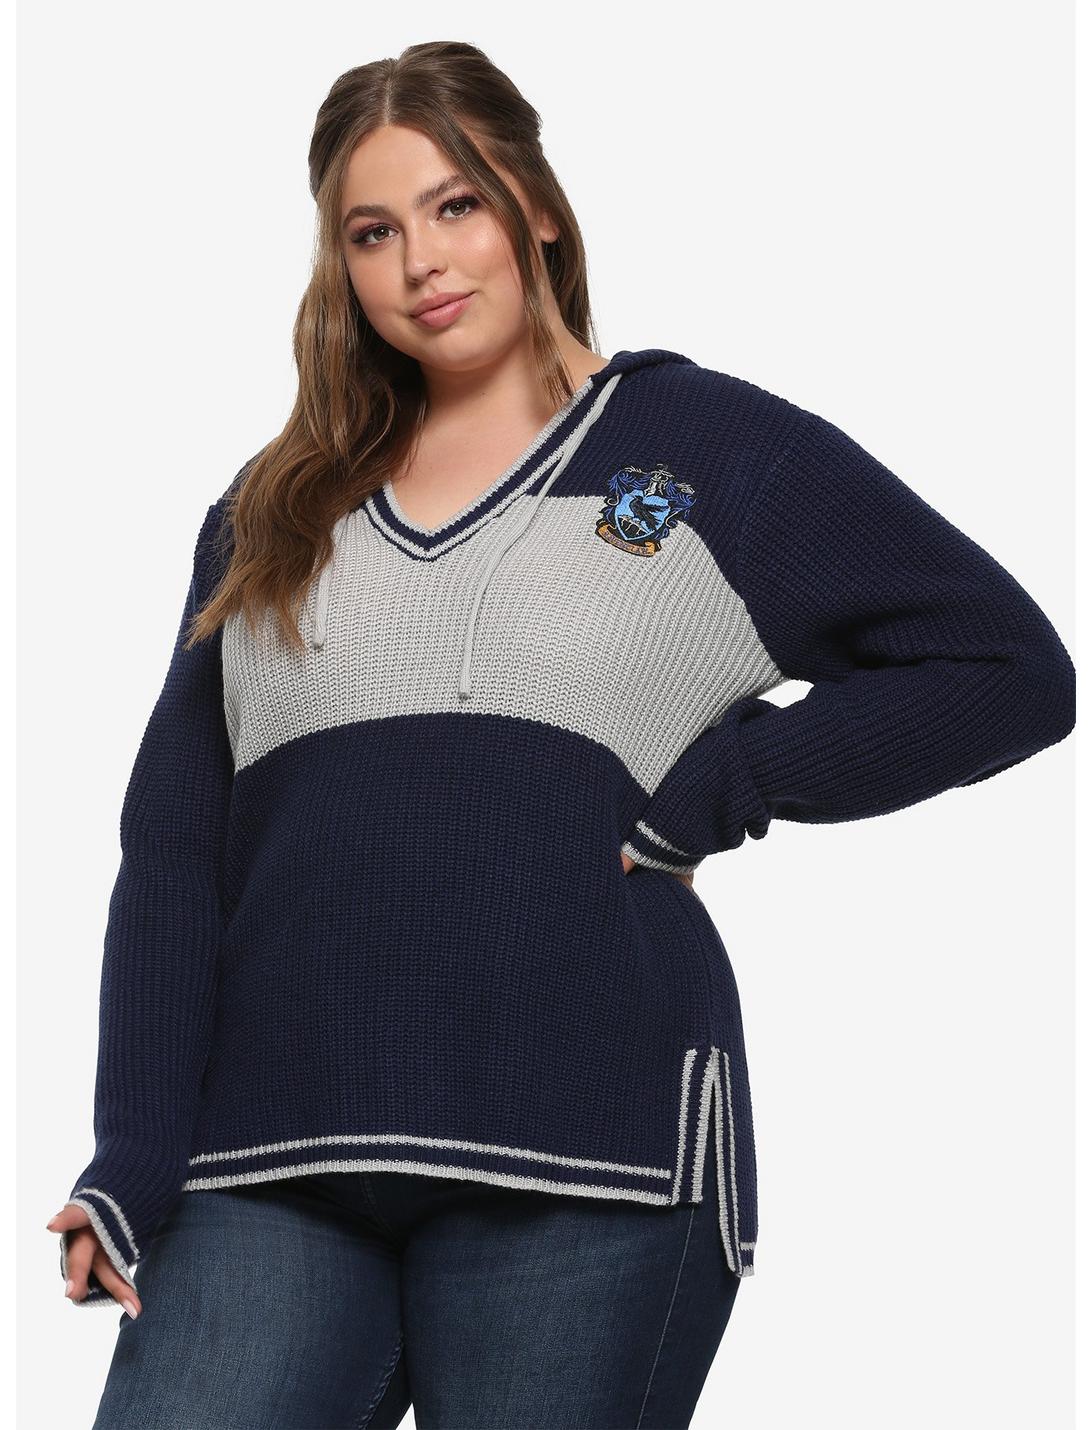 Harry Potter Ravenclaw Girls Hooded Sweater Plus Size, GREY, hi-res